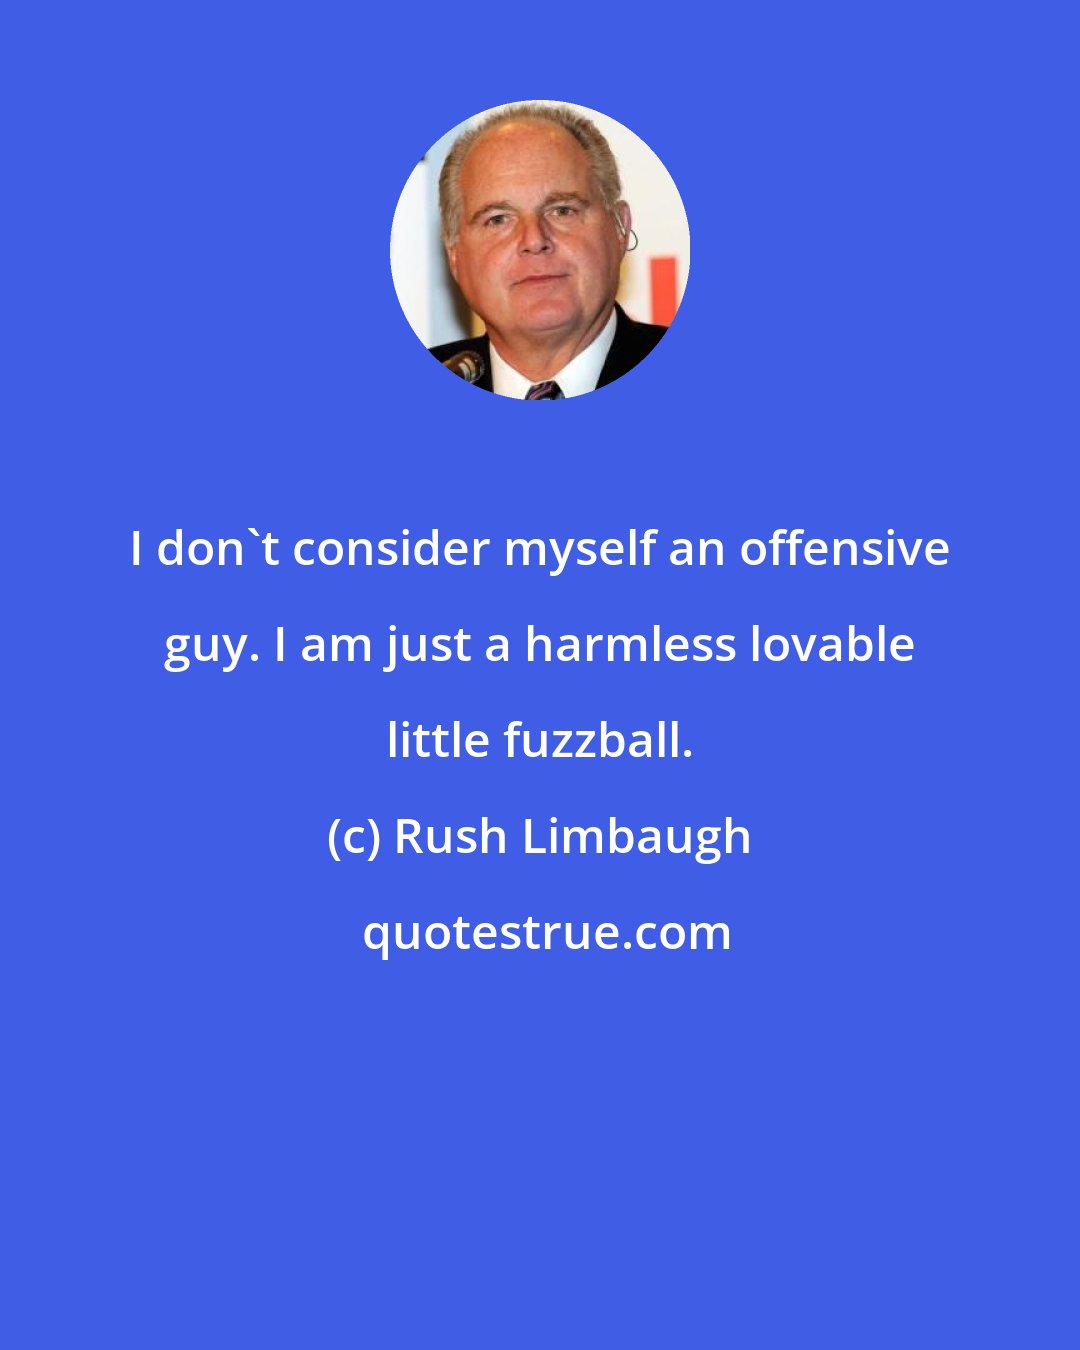 Rush Limbaugh: I don't consider myself an offensive guy. I am just a harmless lovable little fuzzball.